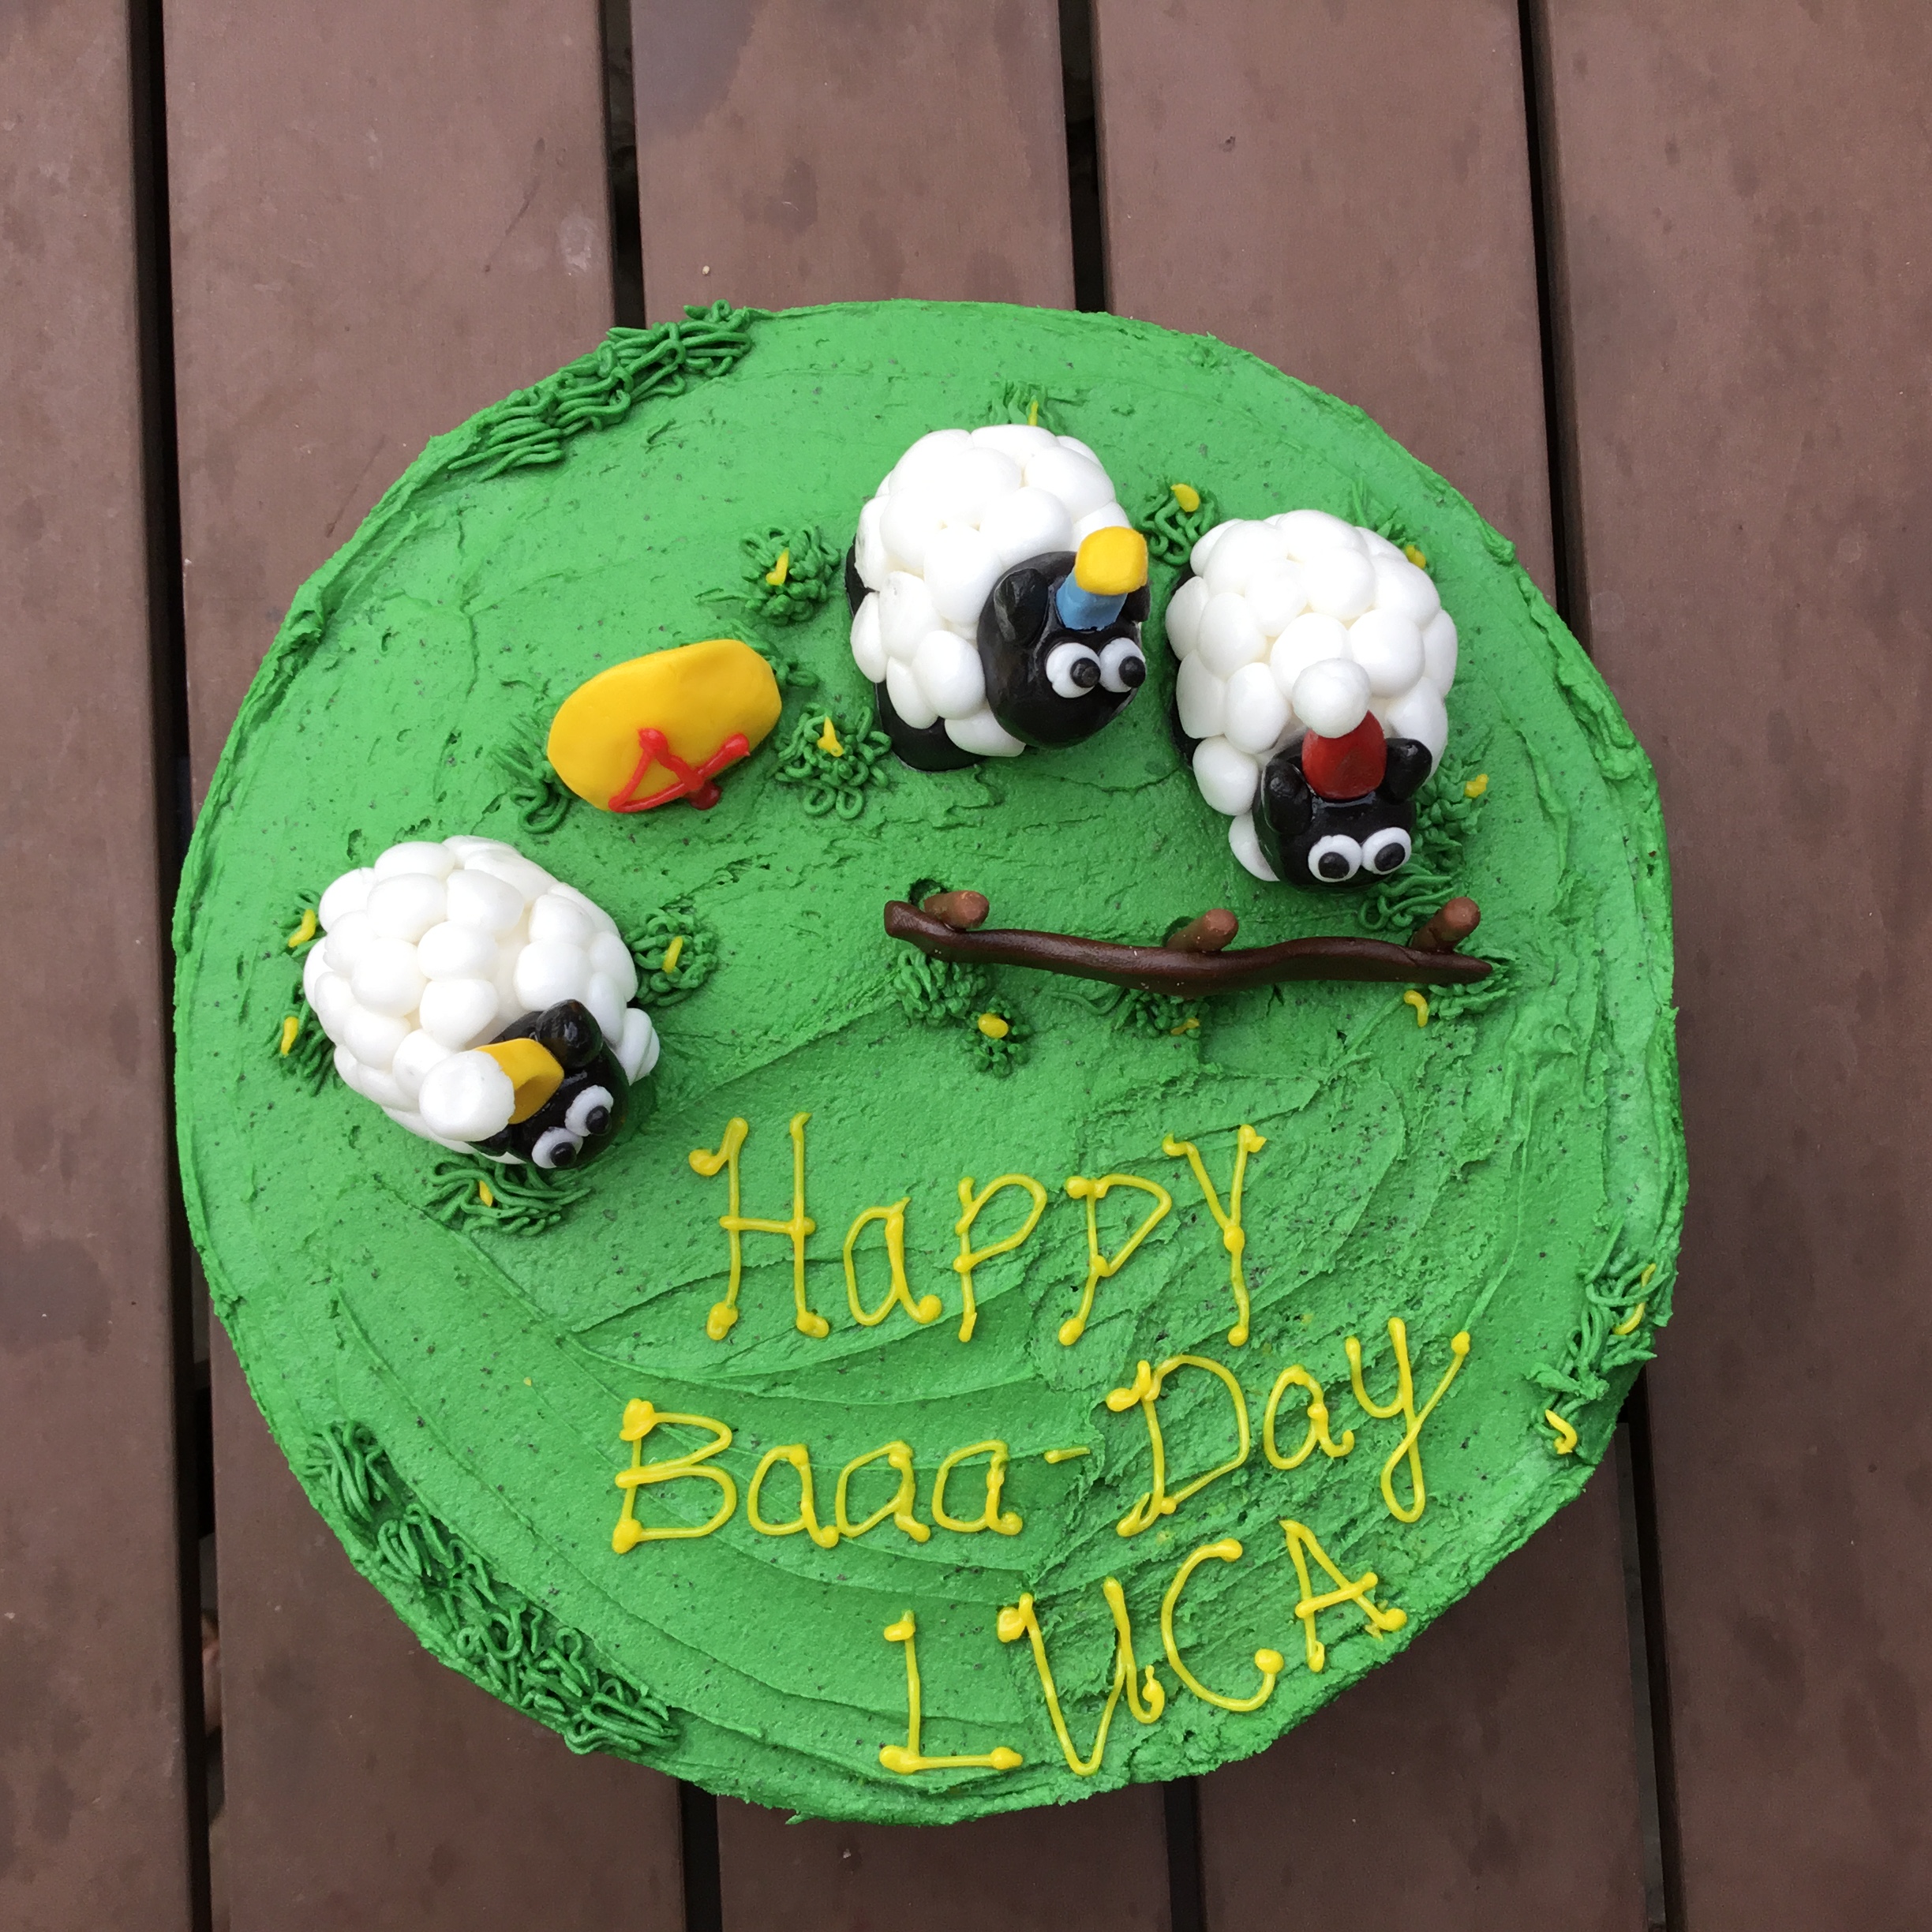 Luca's 4th Baaa-Day Birthday Party Cake — N.Y.LO.